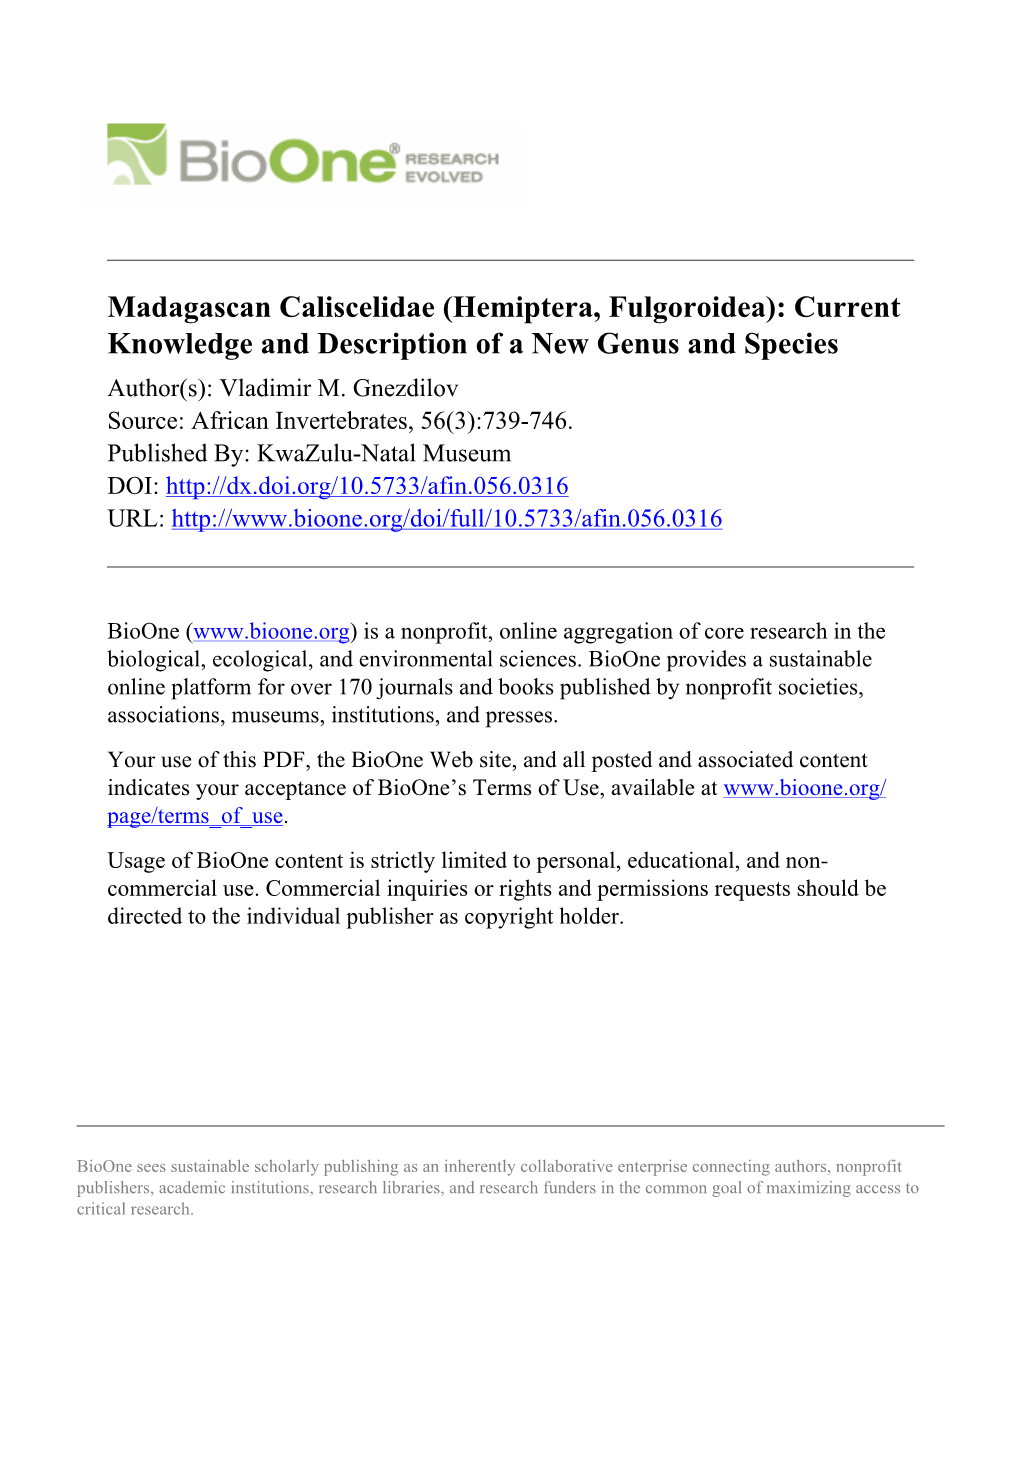 Madagascan Caliscelidae (Hemiptera, Fulgoroidea): Current Knowledge and Description of a New Genus and Species Author(S): Vladimir M